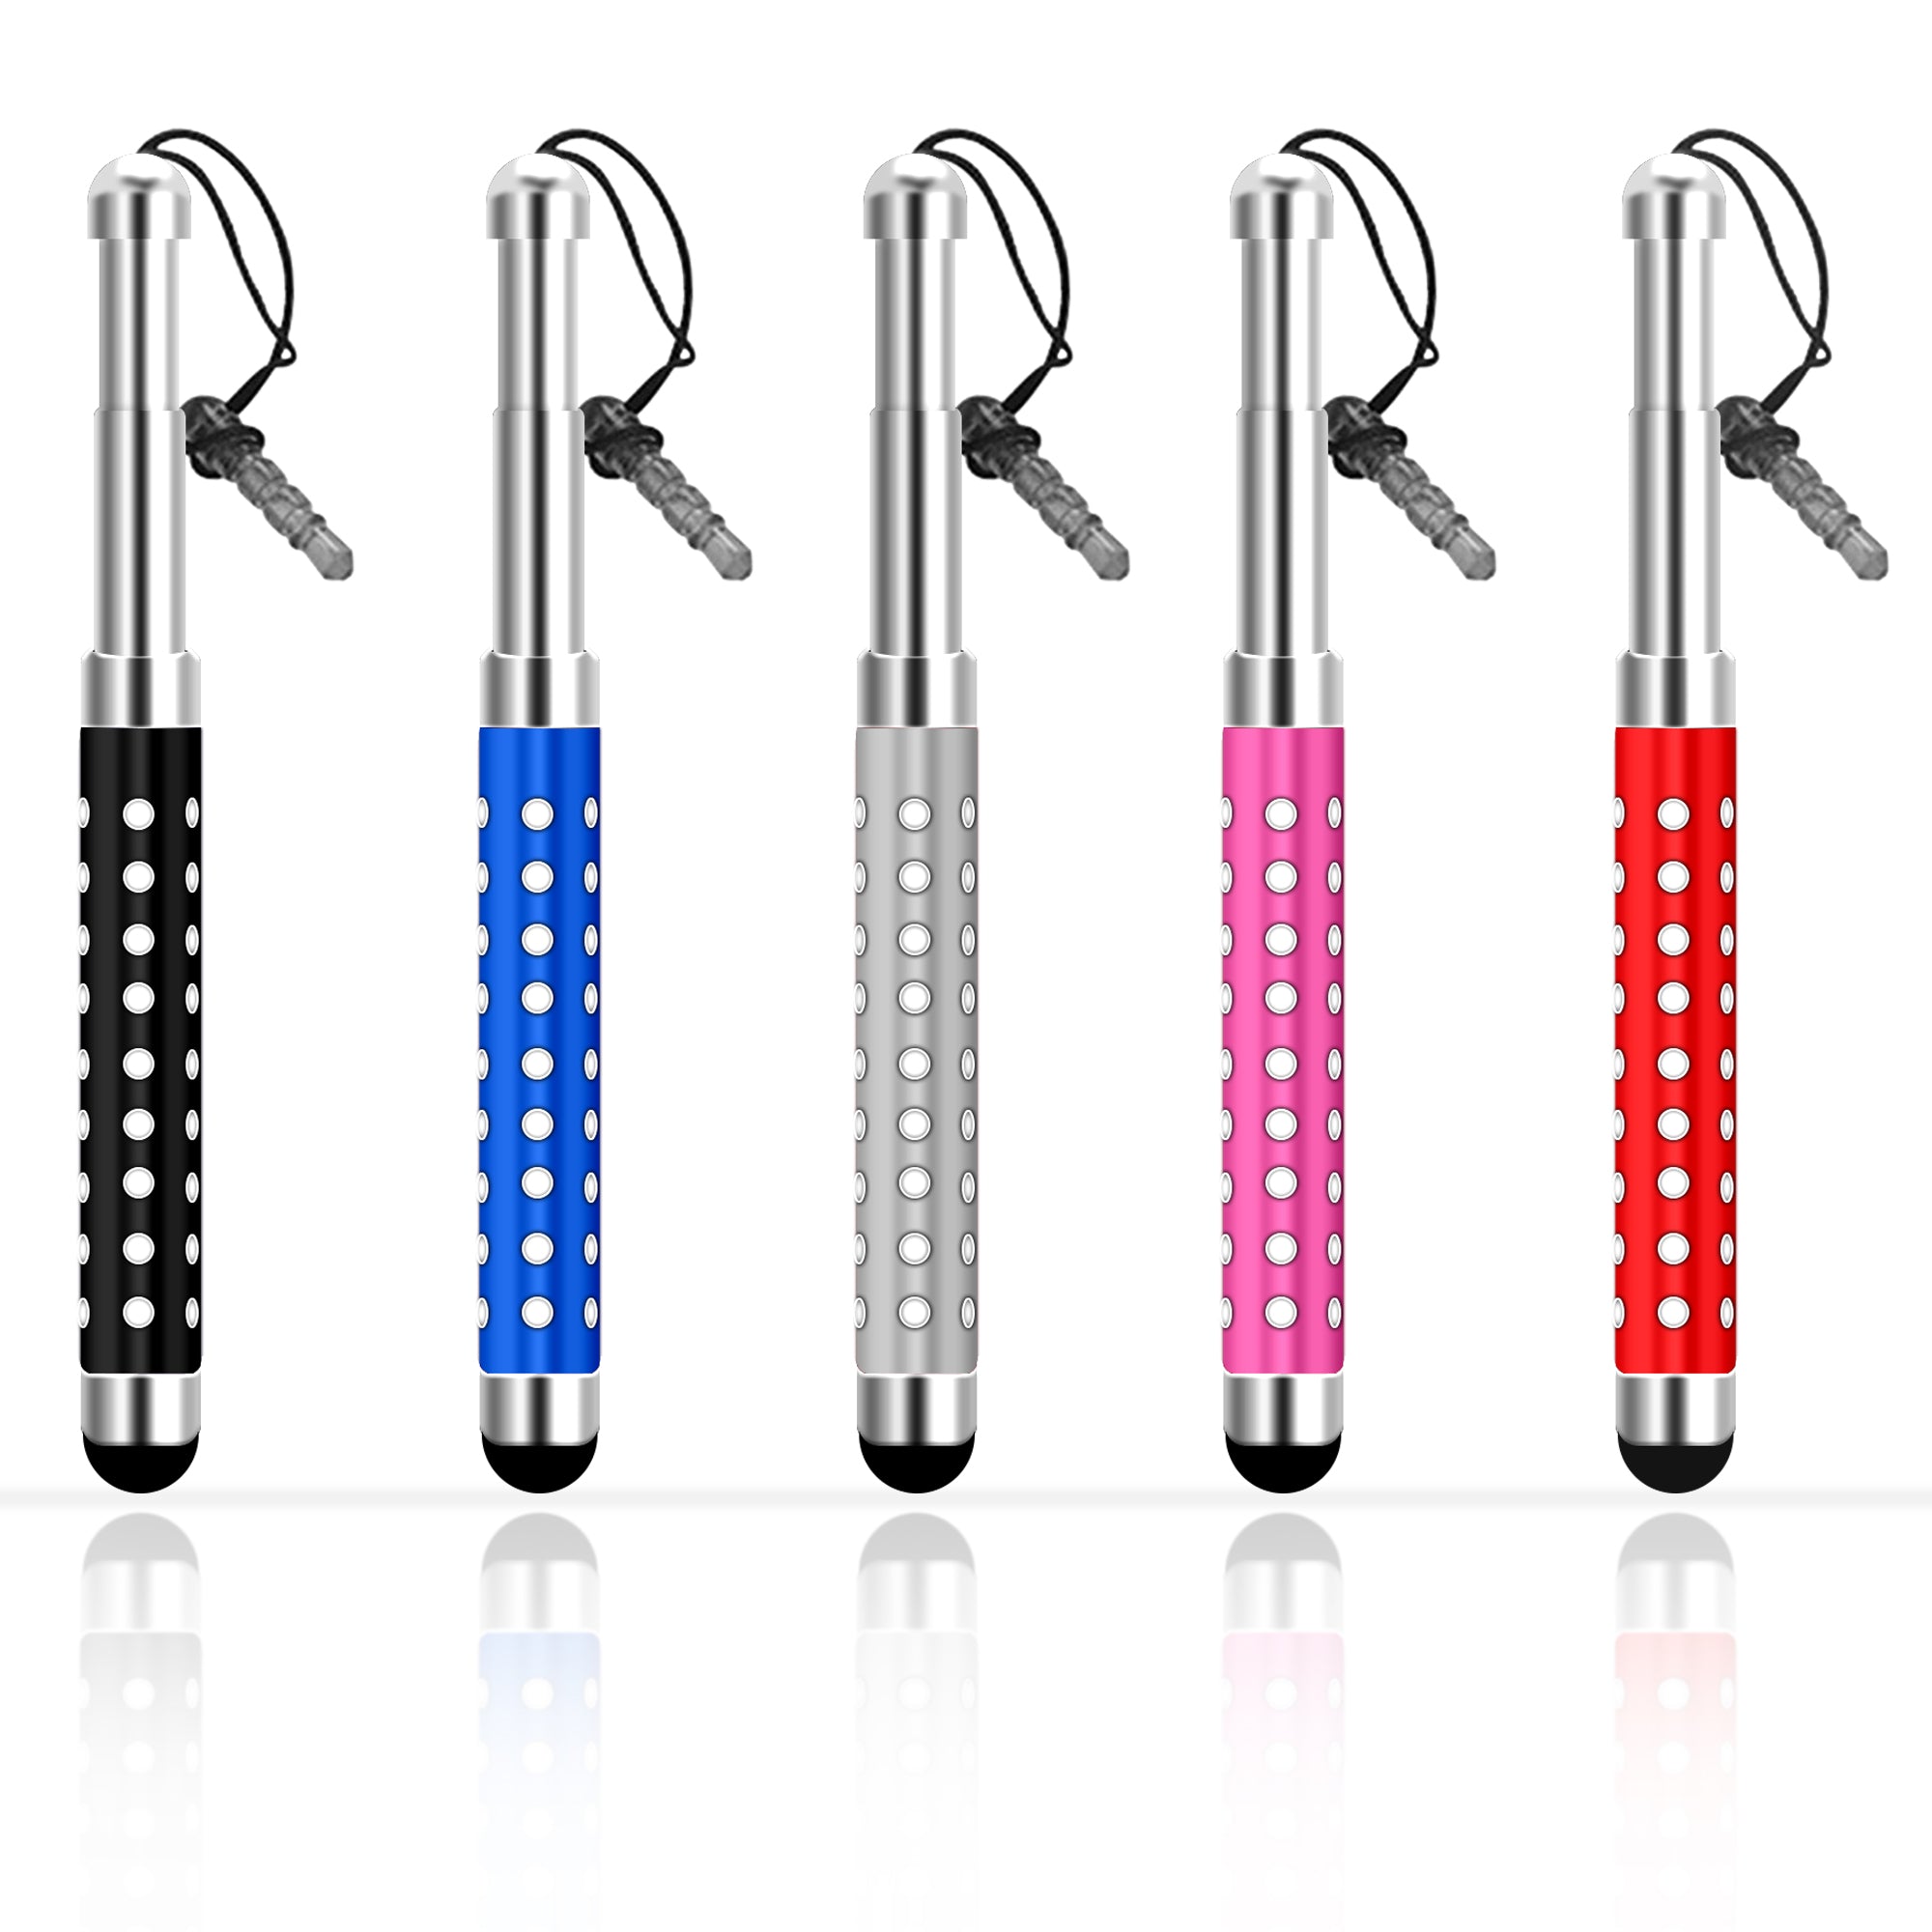 Retractable Stylus [10 Pack] For iPhone, Samsung Tablet Capacitive Touch Pen